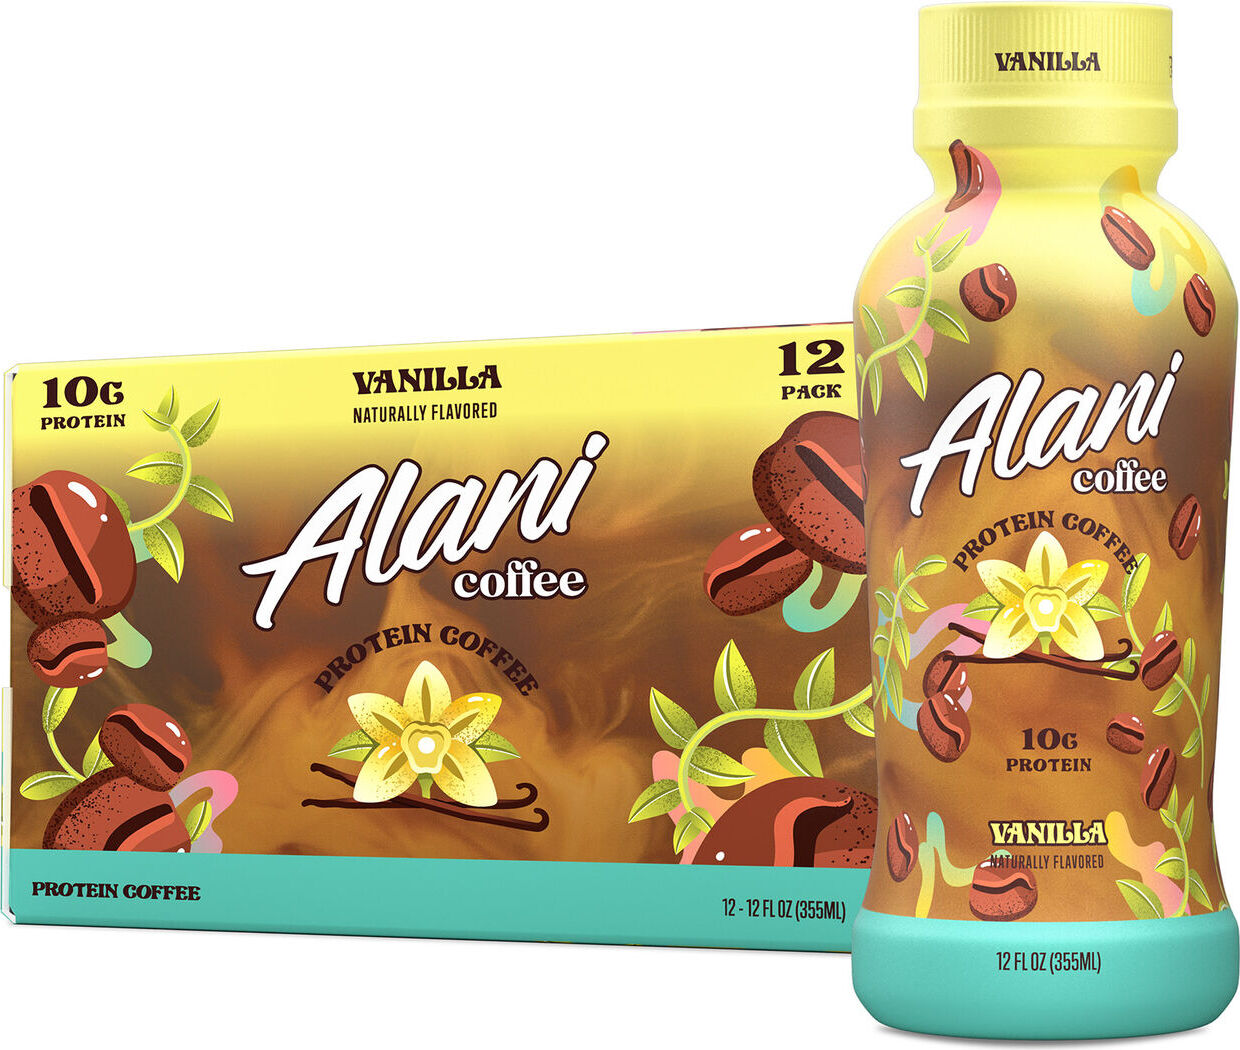 https://www.priceplow.com/static/images/products/alani-nu-protein-coffee.jpg